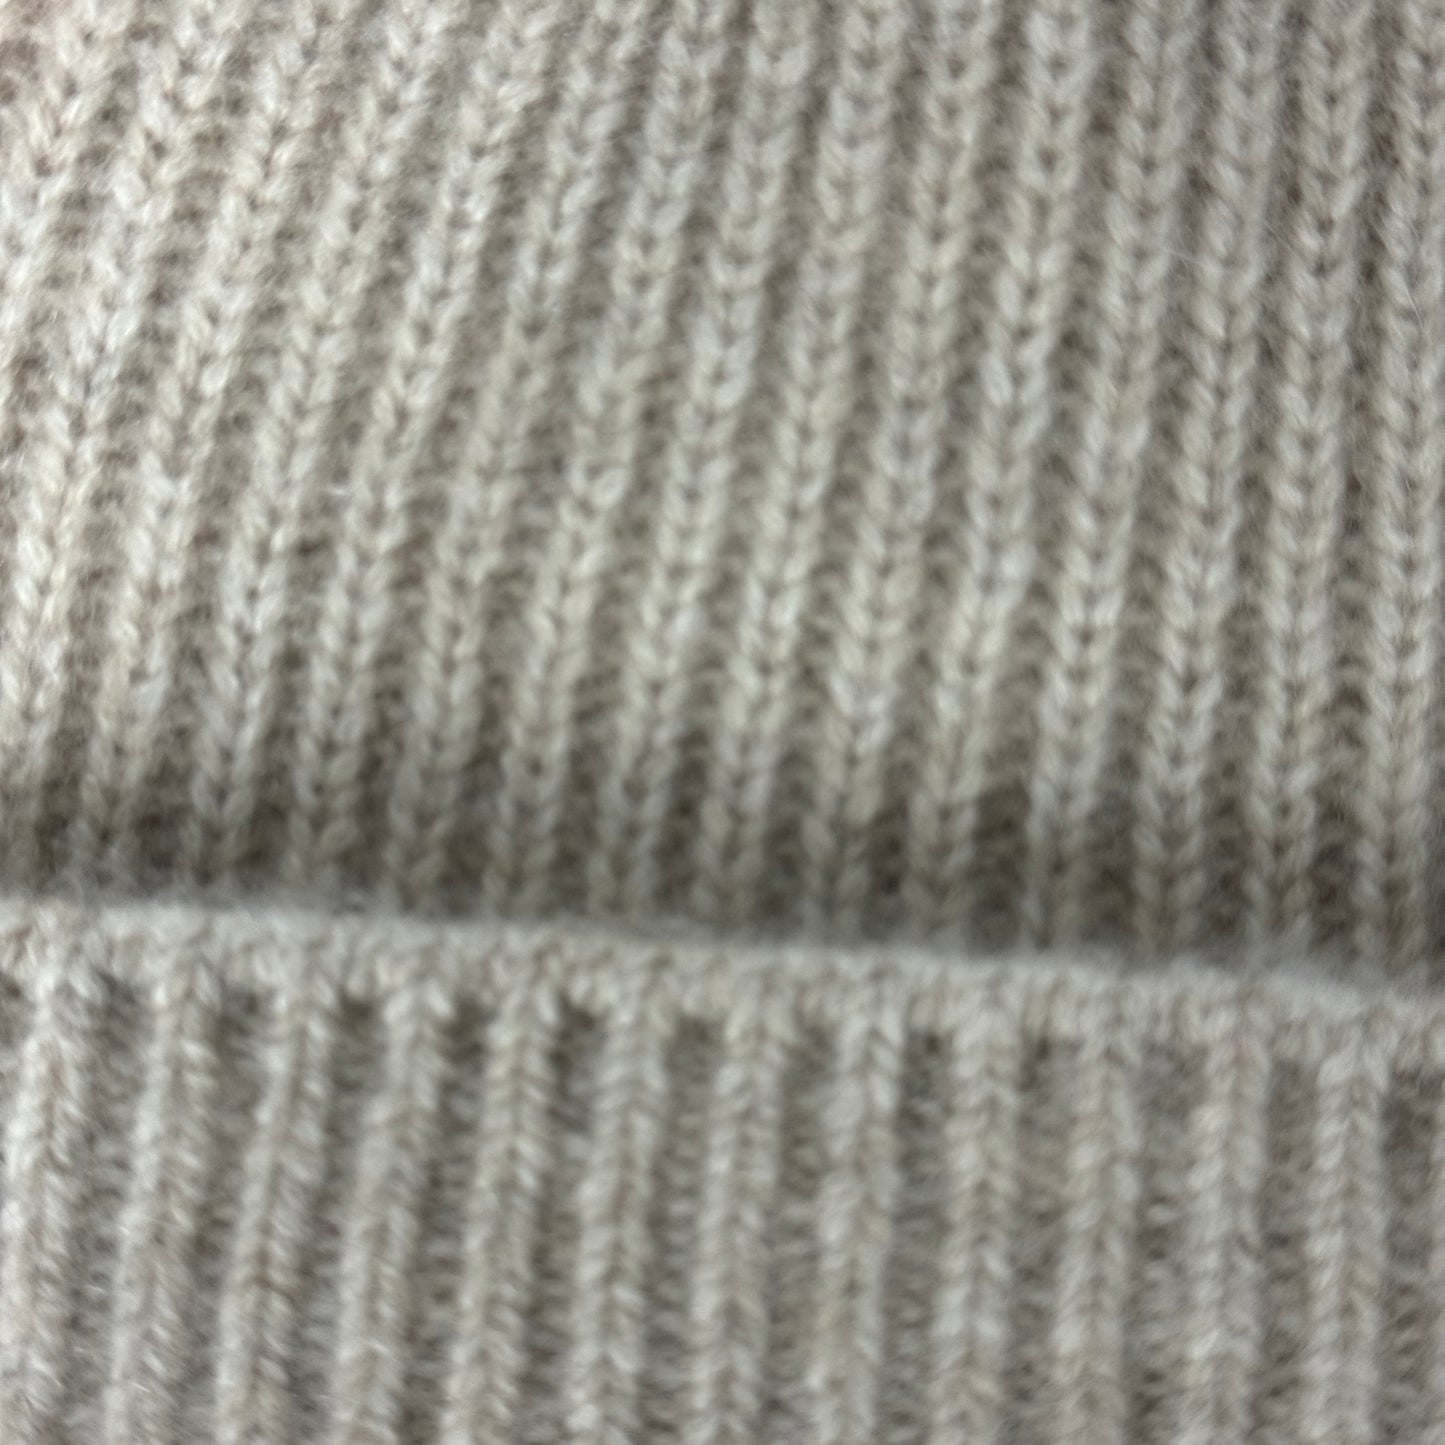 Ribbed Cashmere Beanie Hat In Beige